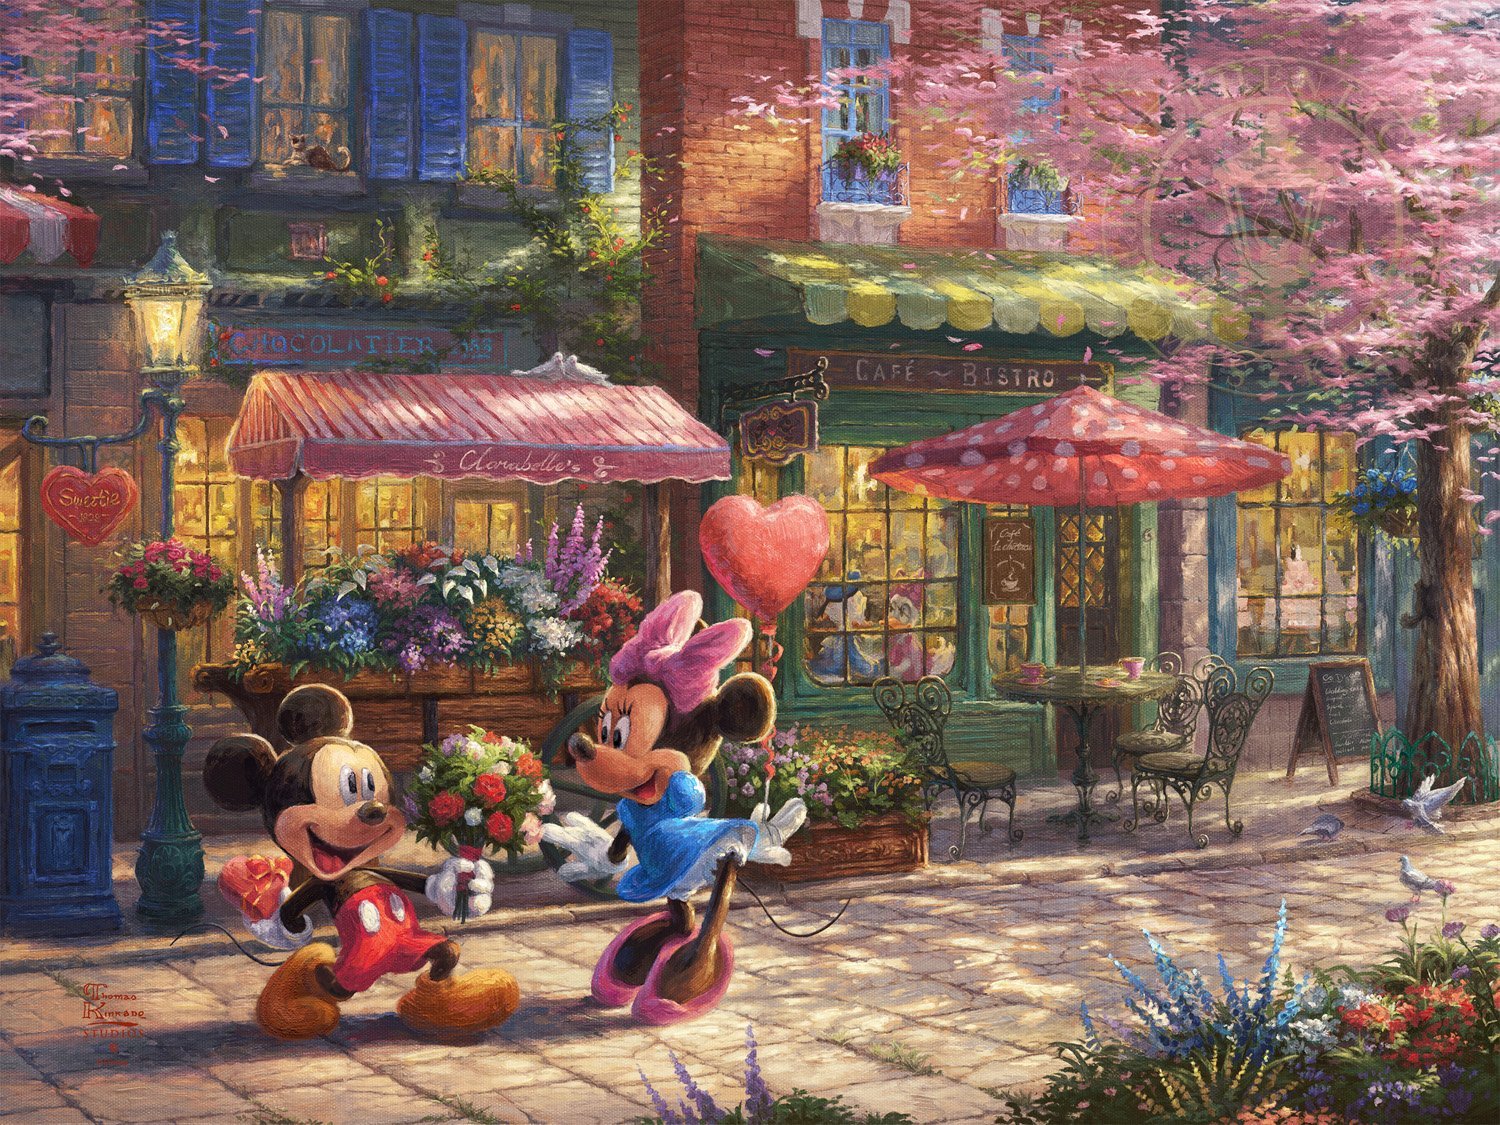 Mickey presents Minnie with a bouquet of flowers and a heart shaped box of chocolate in front of Cafe Bristo - unframed